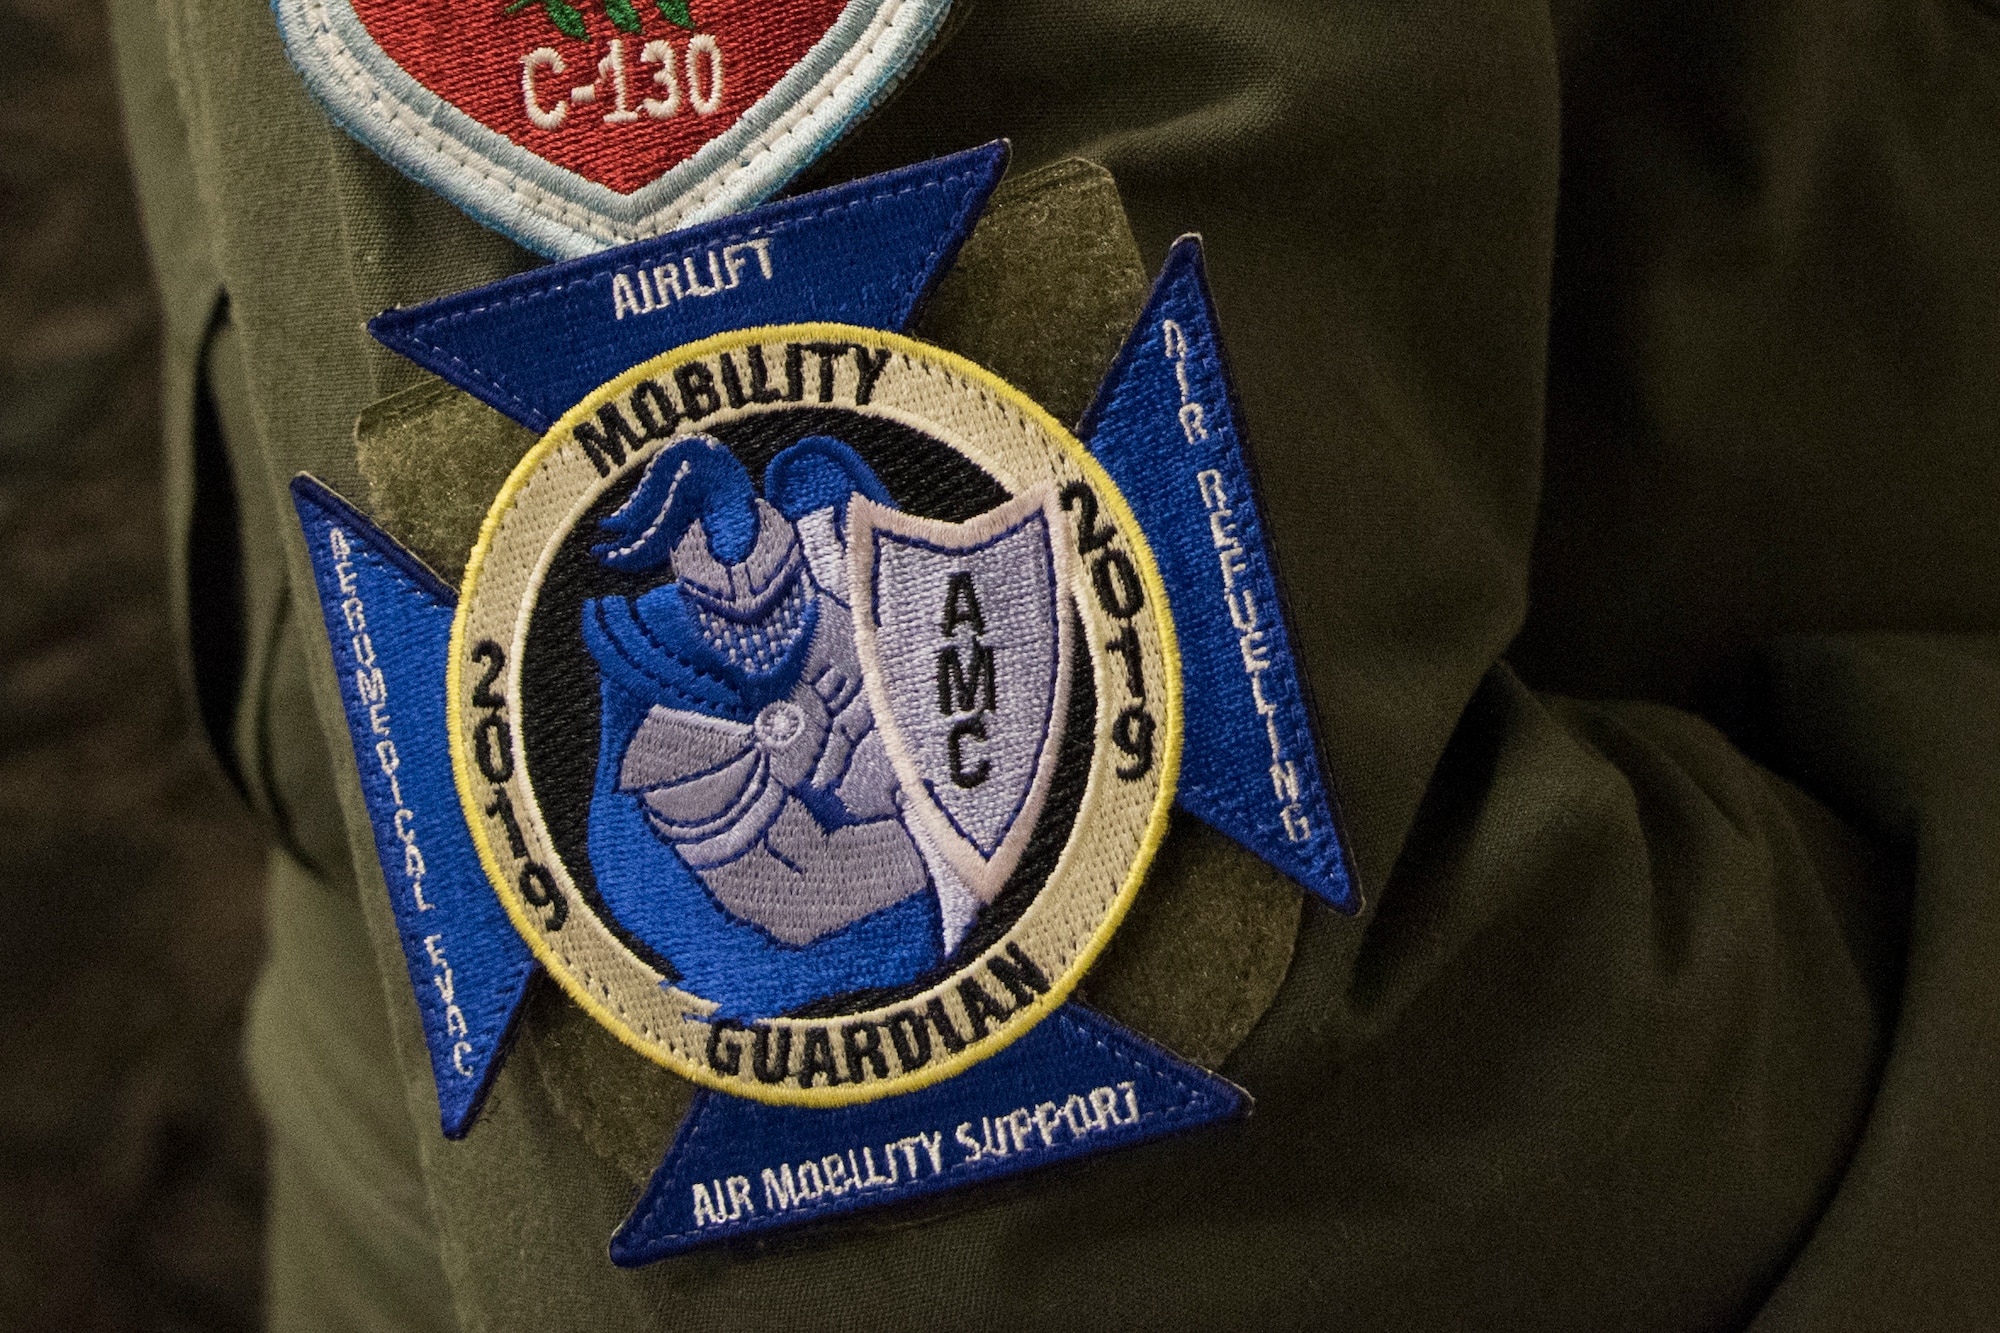 An international attendee wears the ceremonial patch of Mobility Guardian 2019 at the International Planning Conference held at Fairchild Air Force Base, Washington, Sept. 19, 2018. Partner forces don’t always use the same equipment or similar operating procedures, so familiarization via training with other forces helps everyone know other military capabilities and compatibilities. (U.S. Air Force photo/Senior Airman Ryan Lackey)